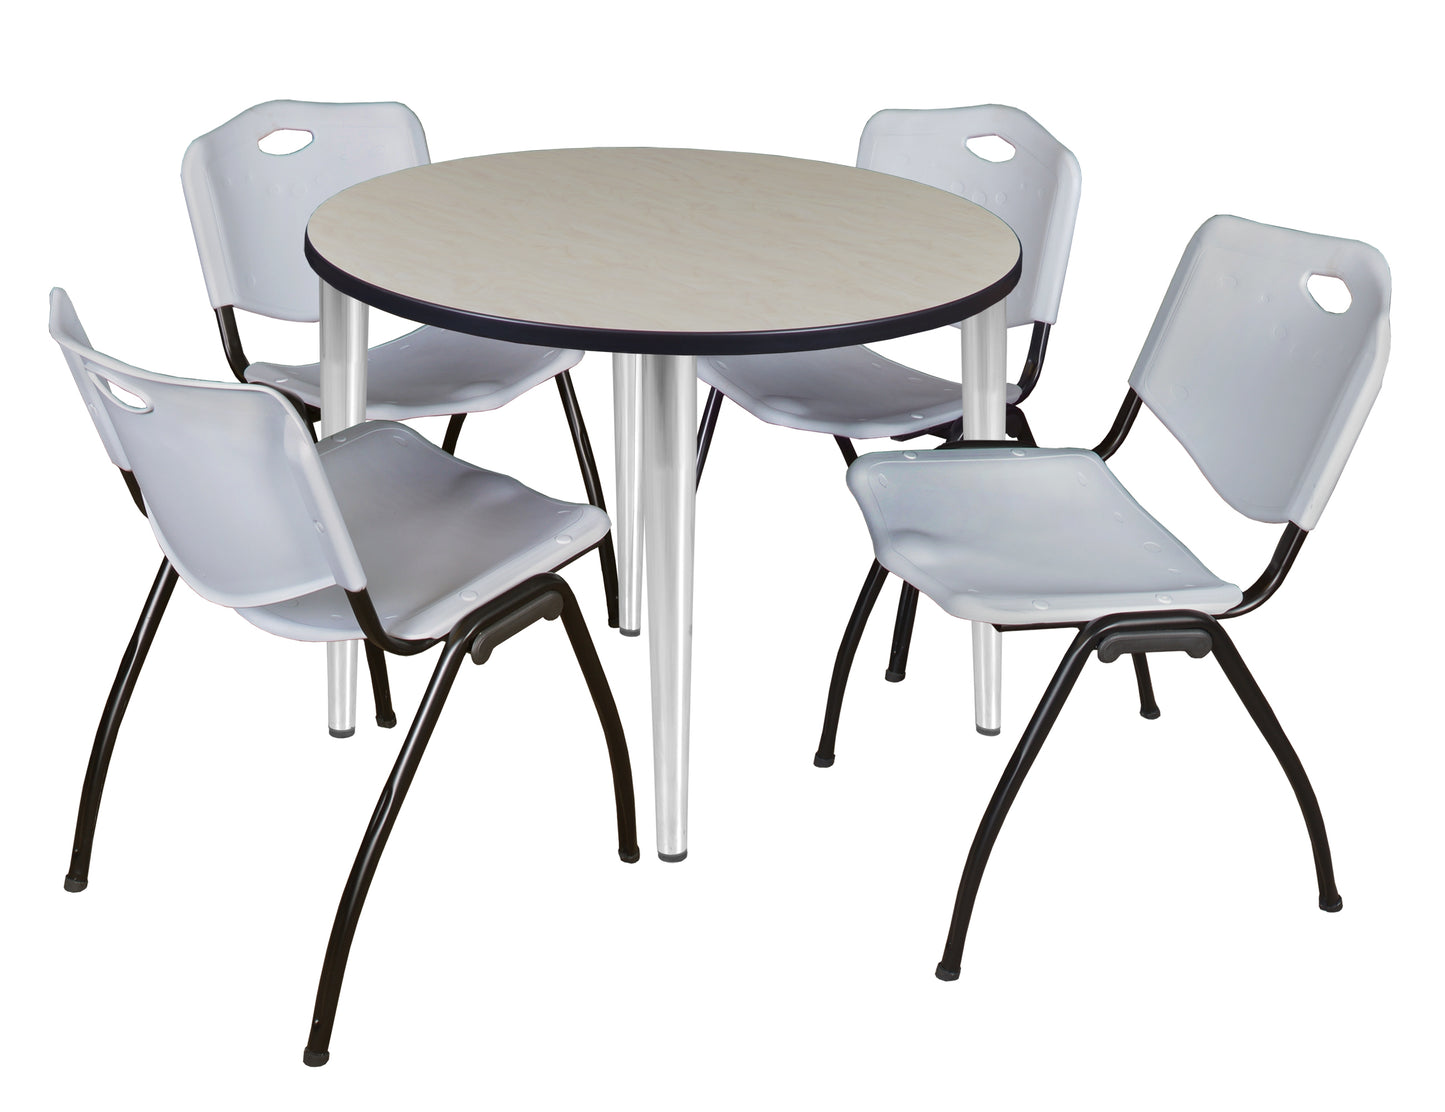 Regency Kahlo 42 in. Round Breakroom Table & 4 M Stack Chairs